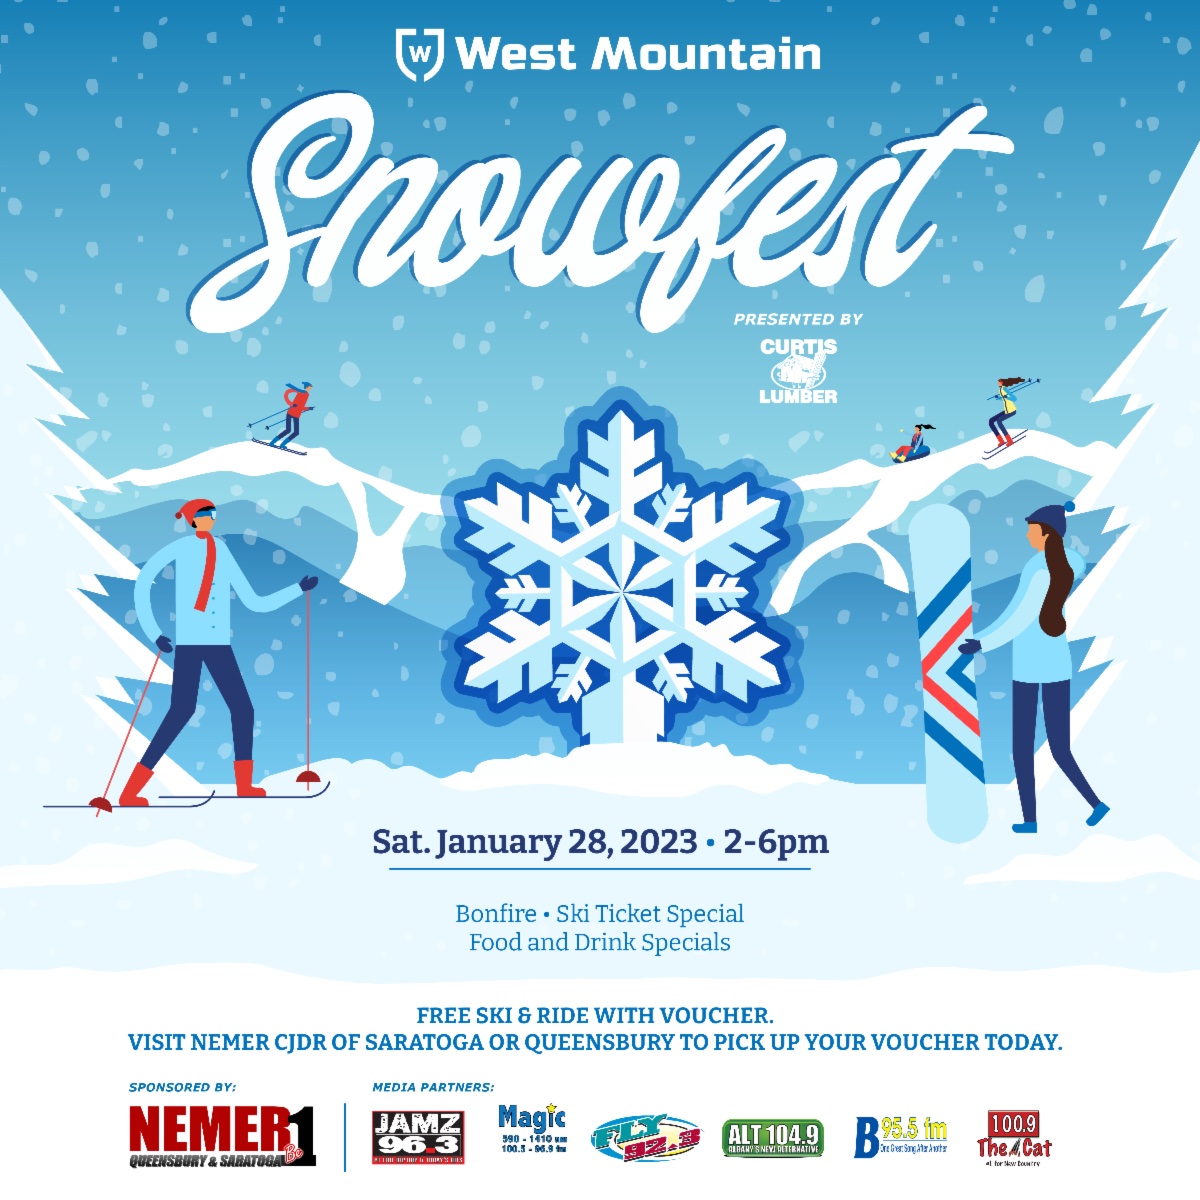 Snowfest at West